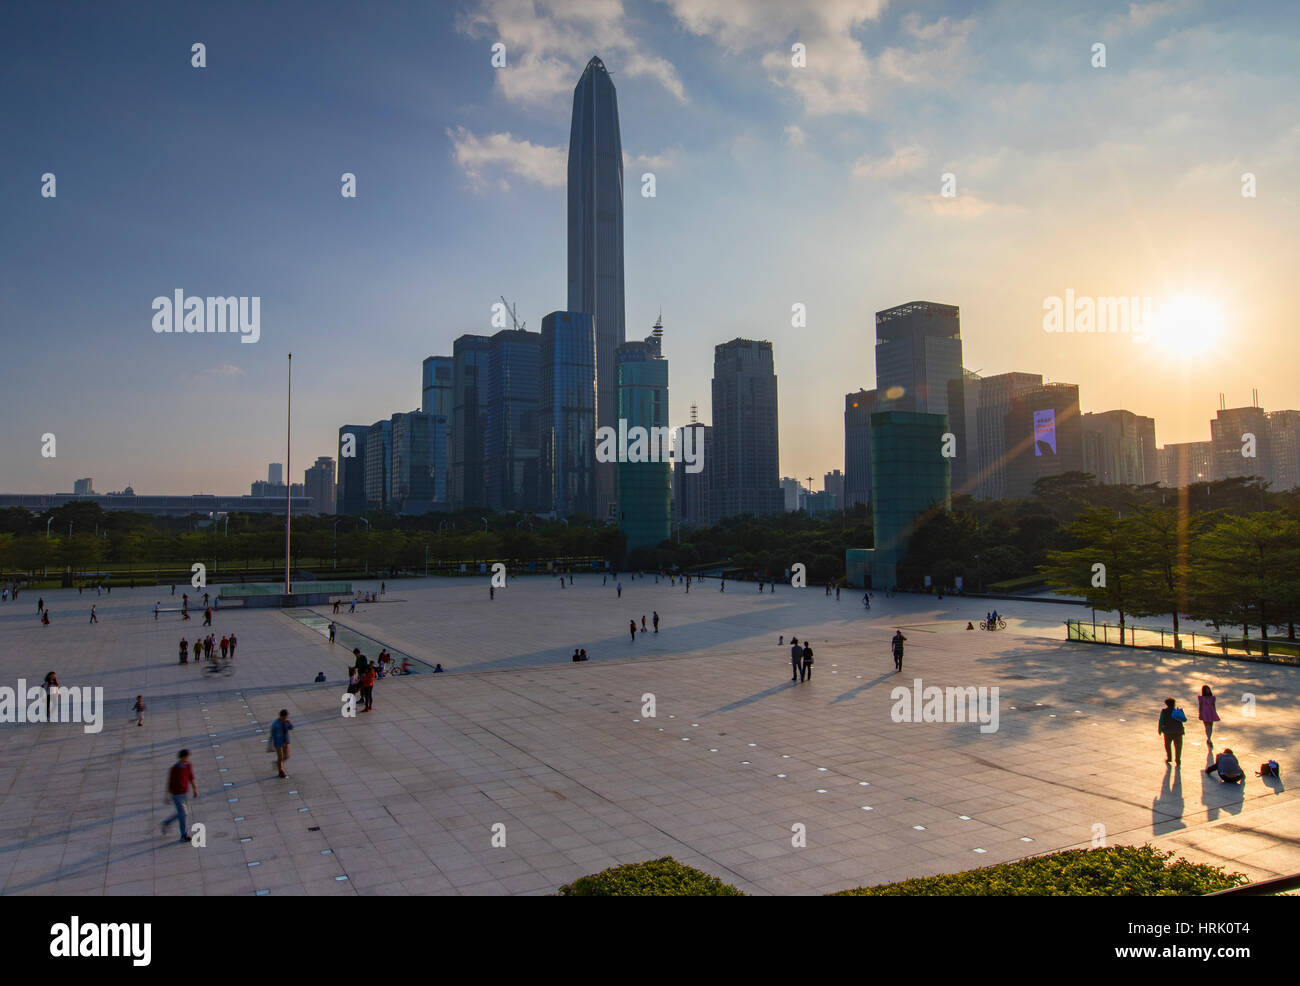 Ping An International Finance Centre (world’s 4th tallest building in 2017 at 600m) and Civic Square, Futian, Shenzhen, Guangdong, China Stock Photo